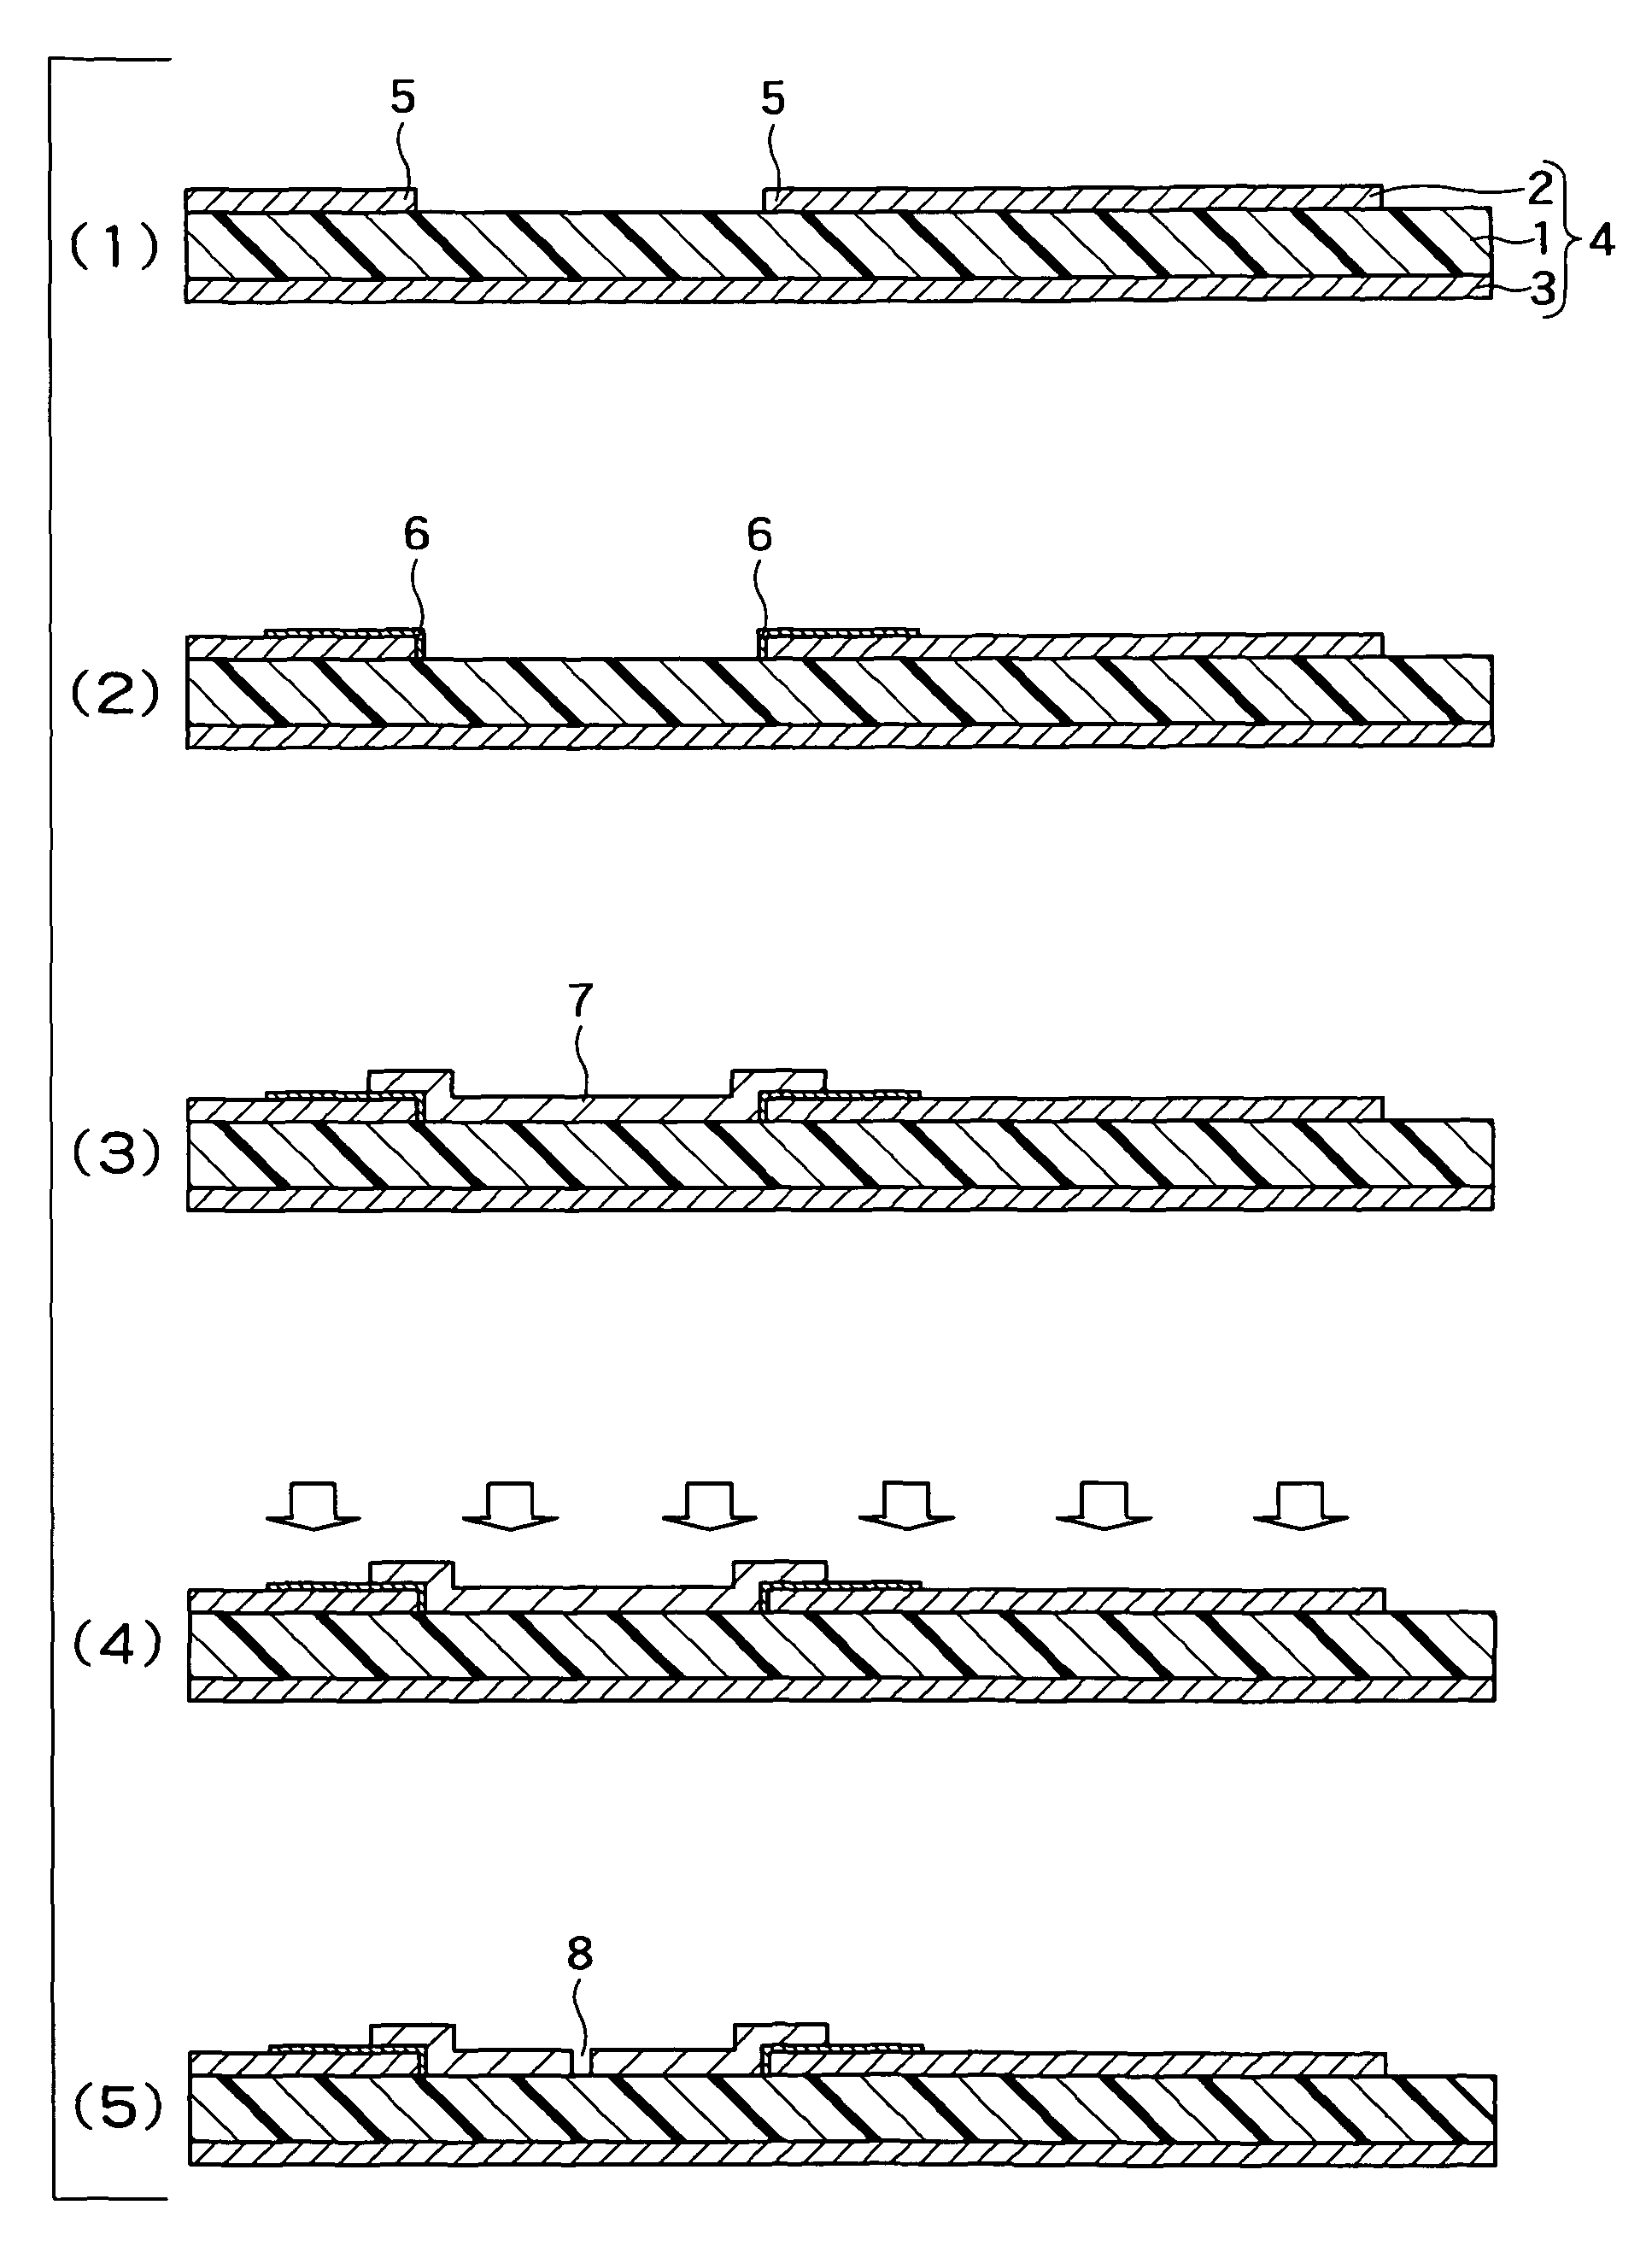 Method for manufacturing a printed-wiring board having a resistive element